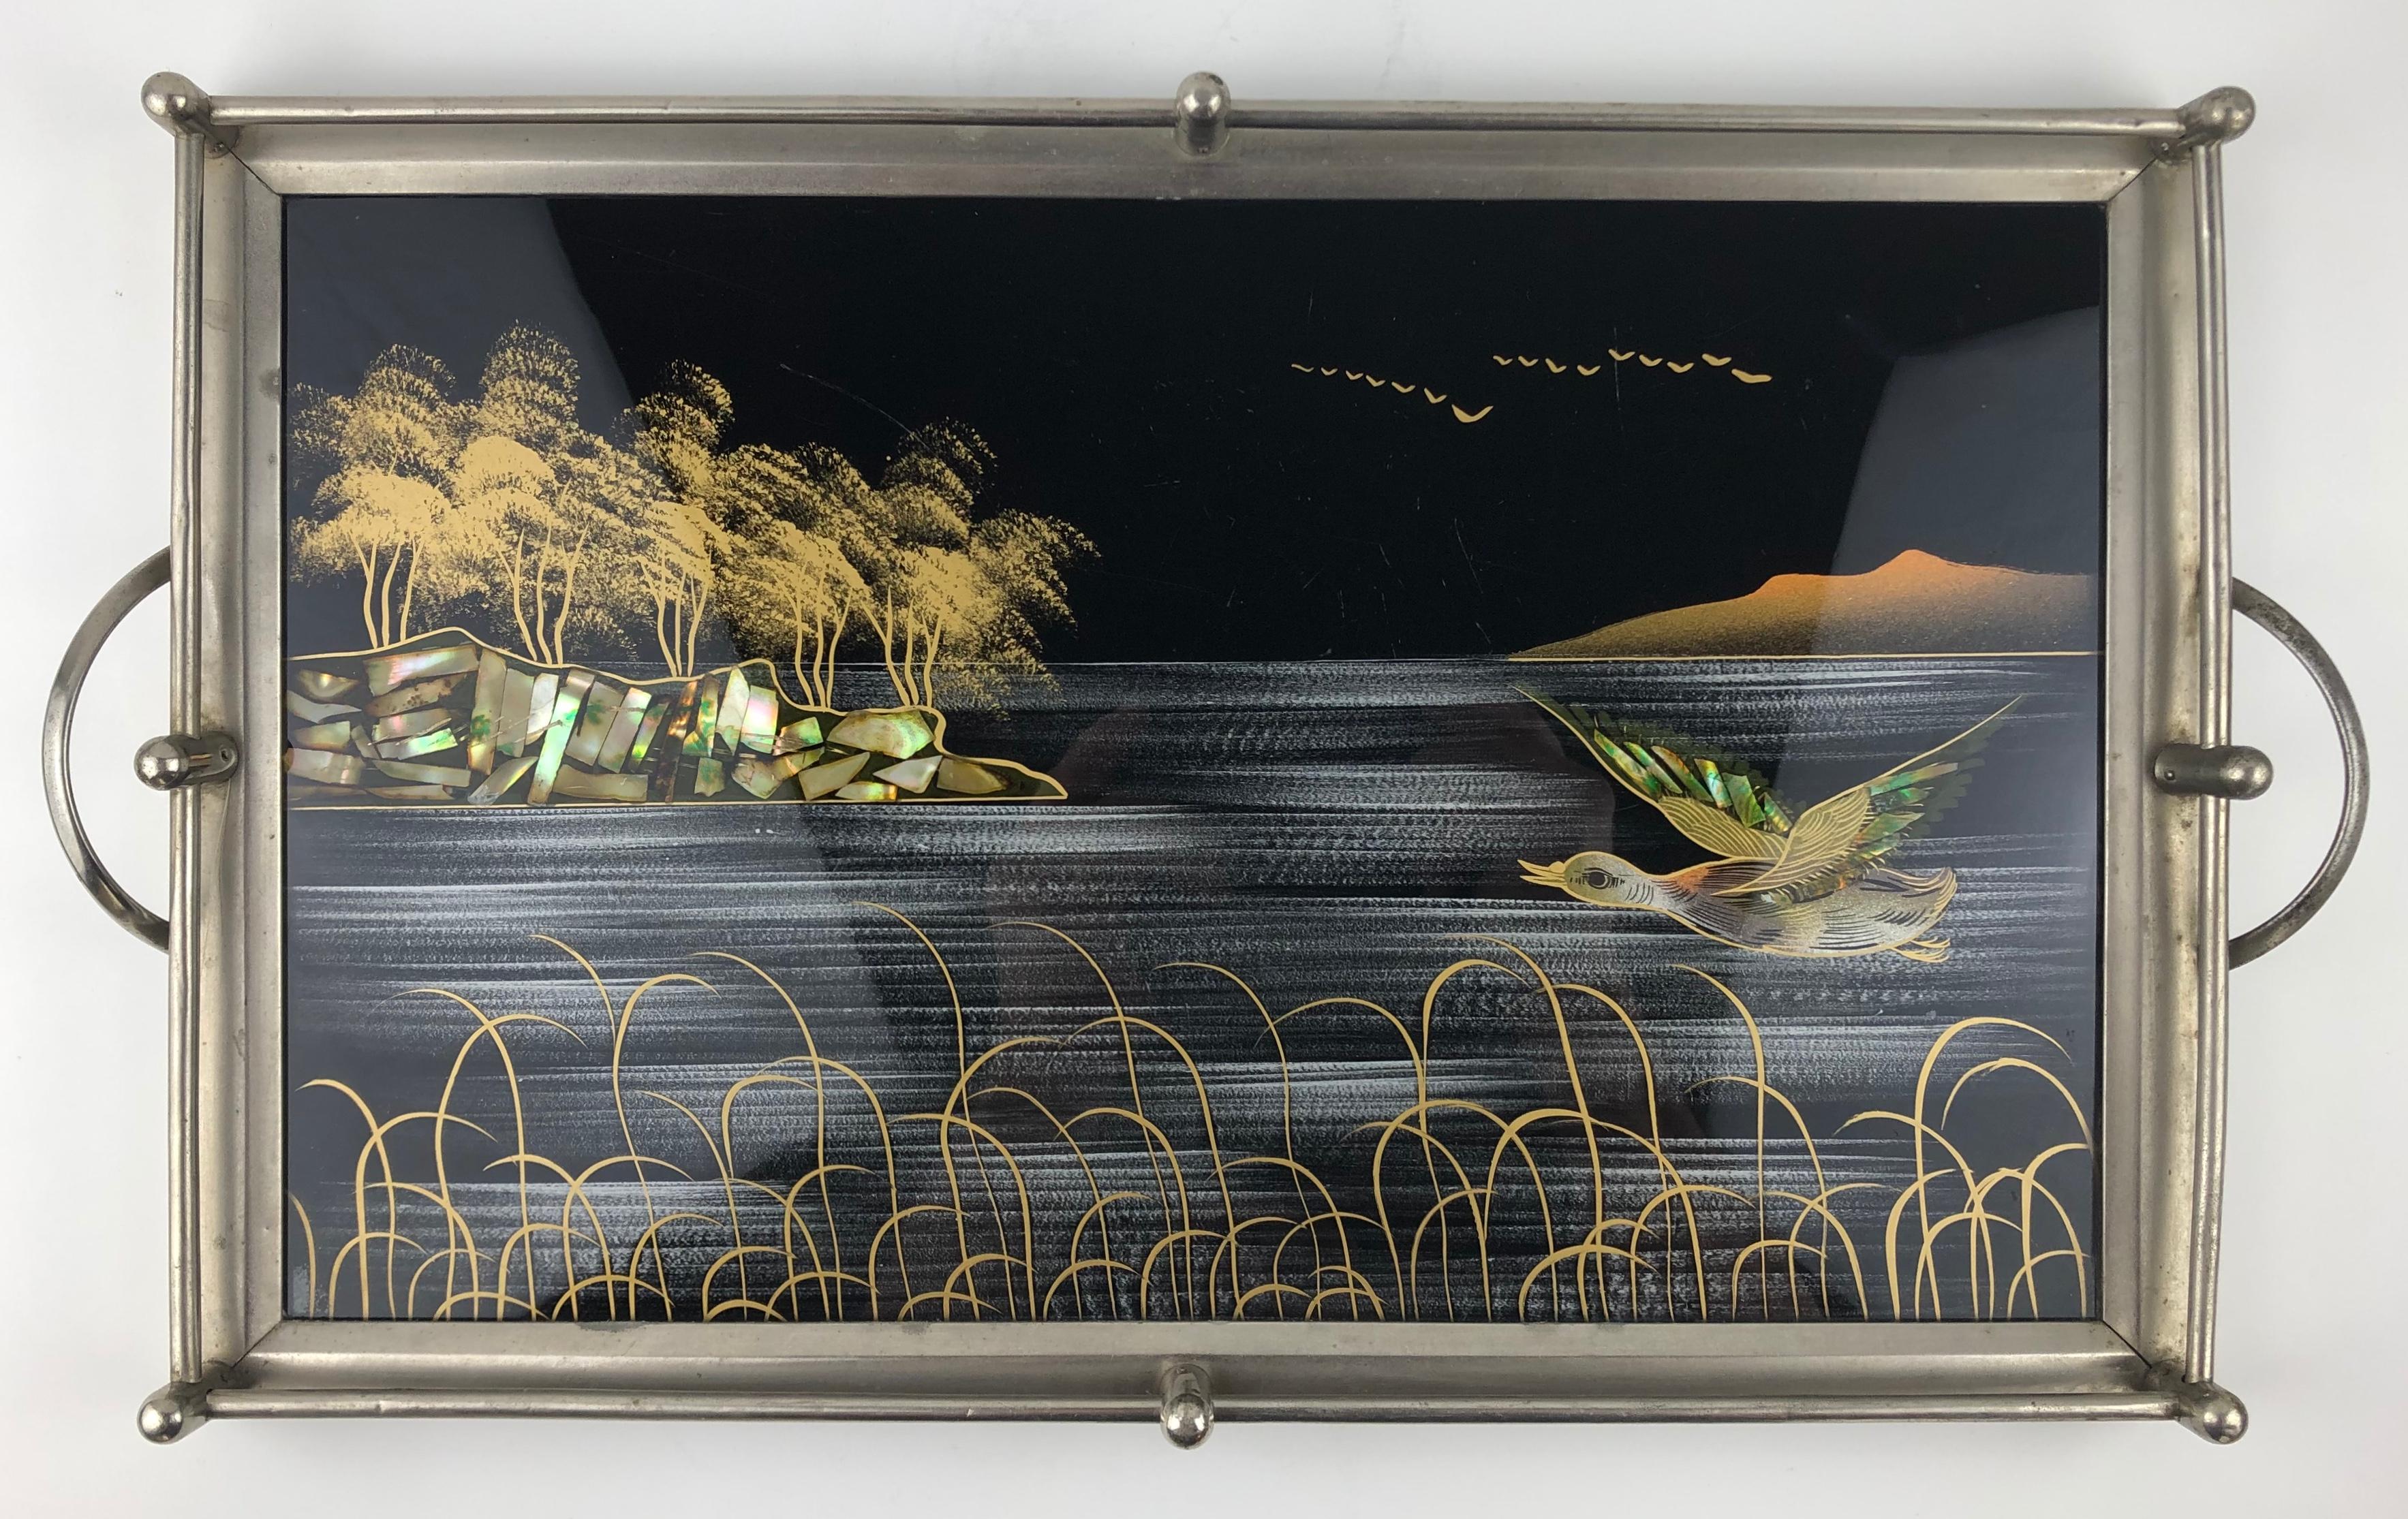 Beautiful French Art Deco chrome serving tray with hand inlayed mother of pearl decor artistically placed under glass. This piece is particularly stunning with intricate details of the birds in flight, a pond or ocean, rock Formations and swaying